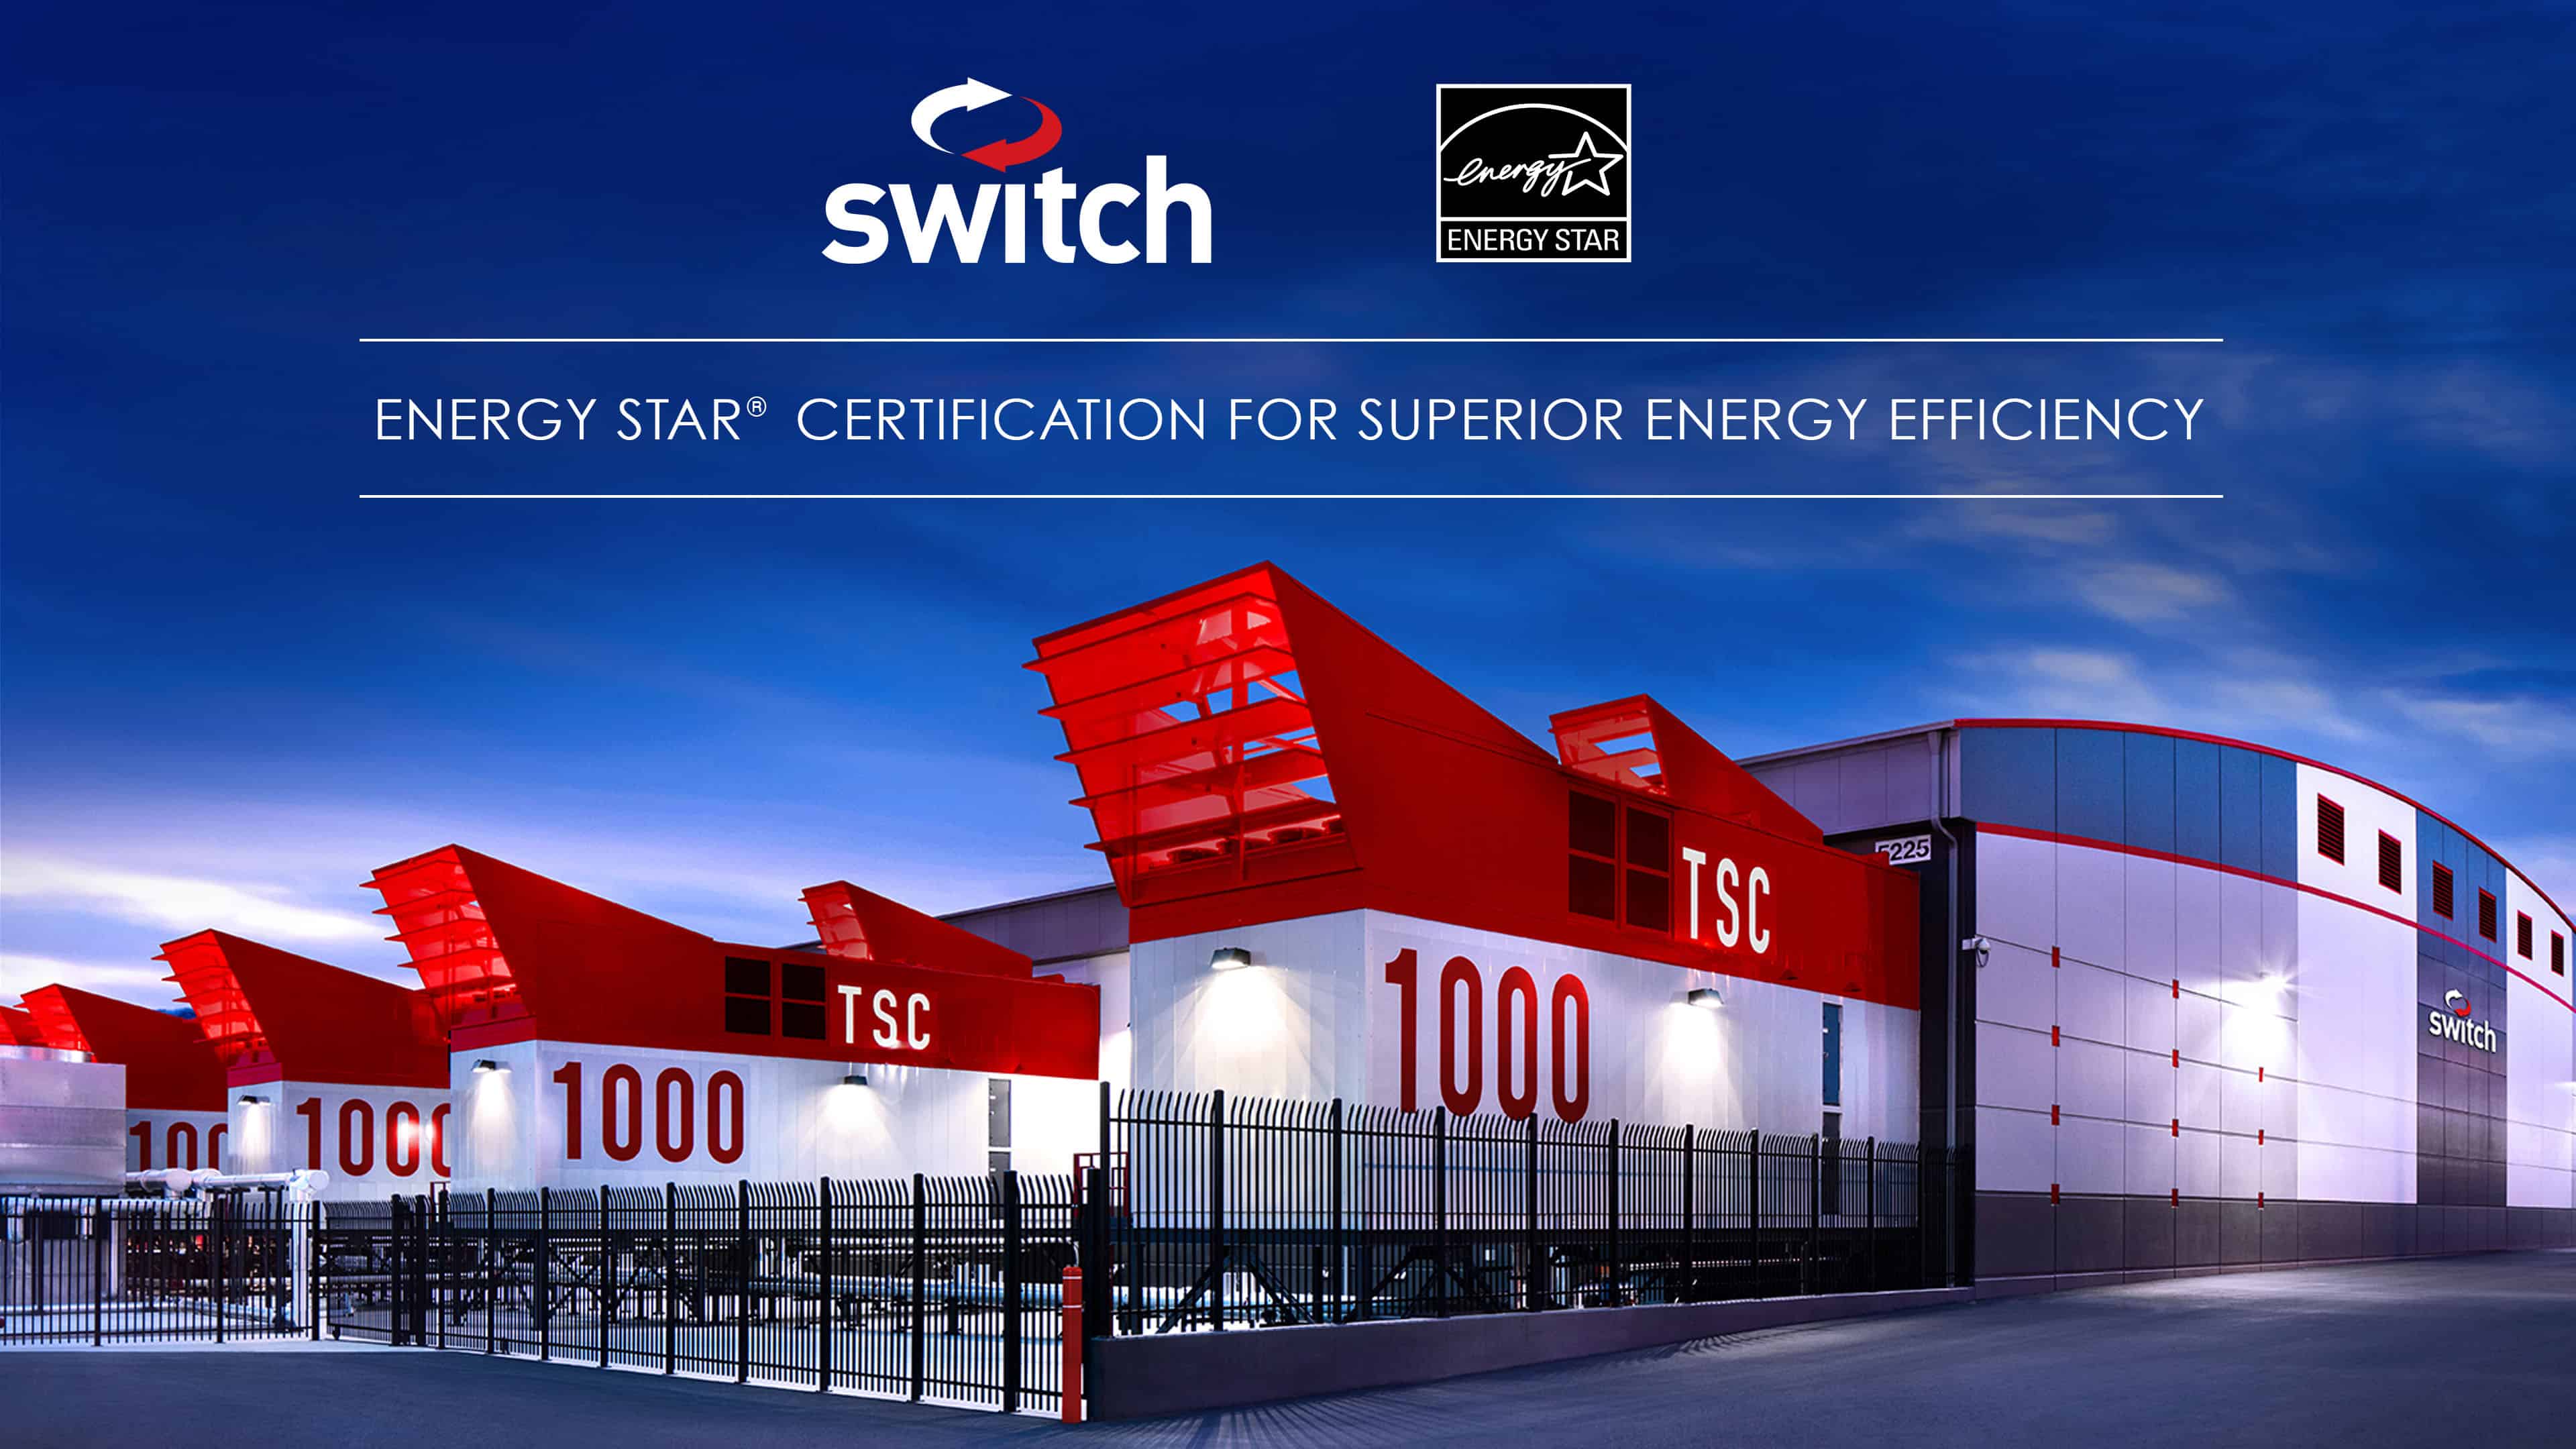 Switch Awarded Environmental Protection Agency’s ENERGY STAR® Certification for Superior Energy Efficiency